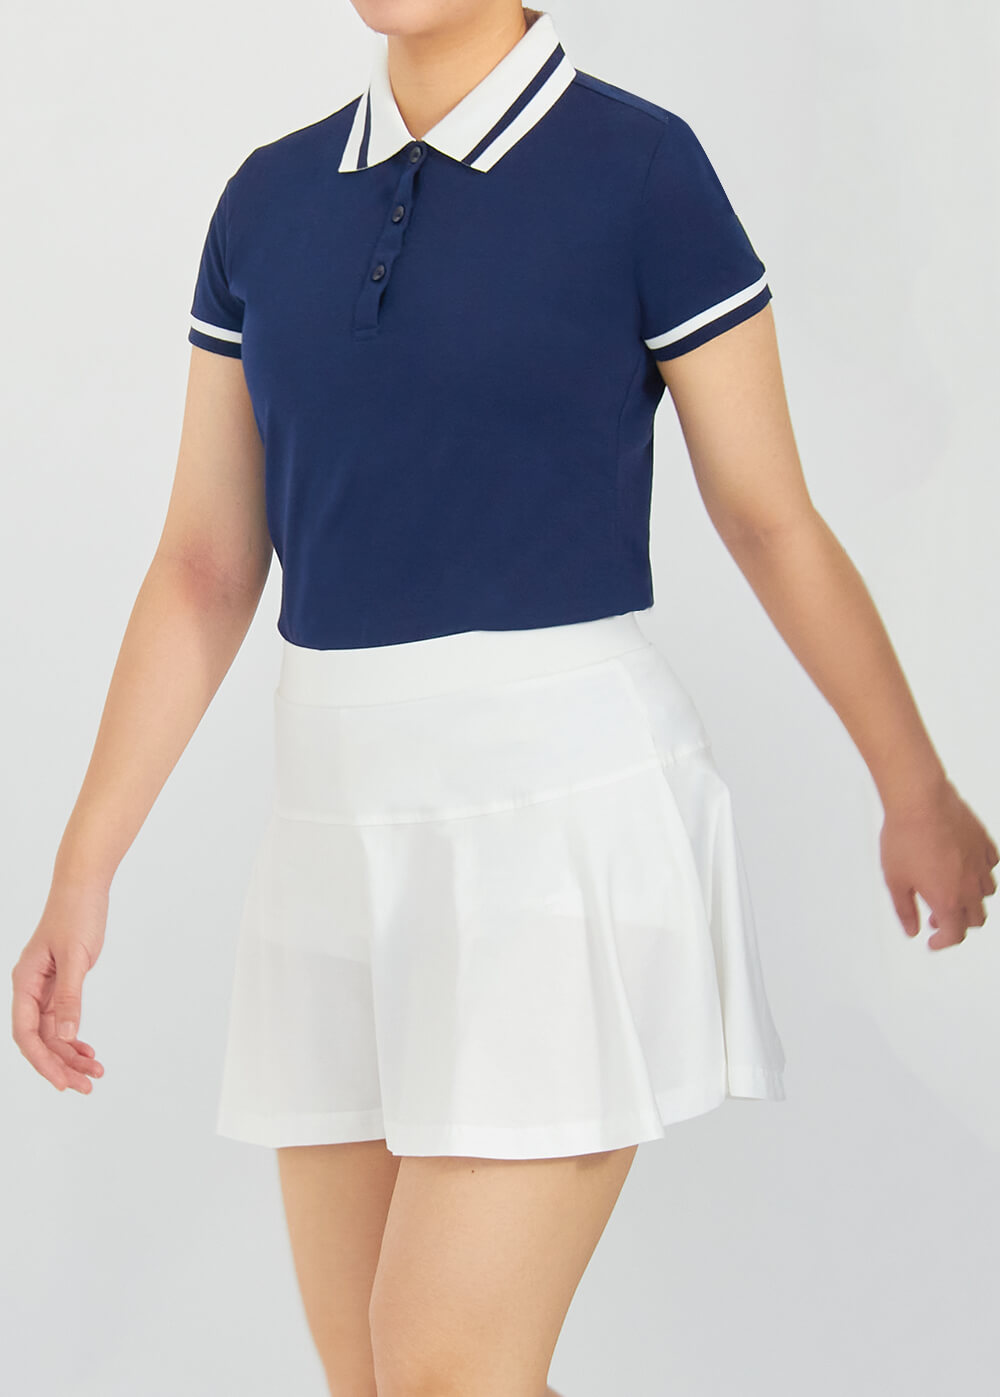 Custom Activewear Sports Clothing Women Golf Polo Shirt and Pleated Skirt